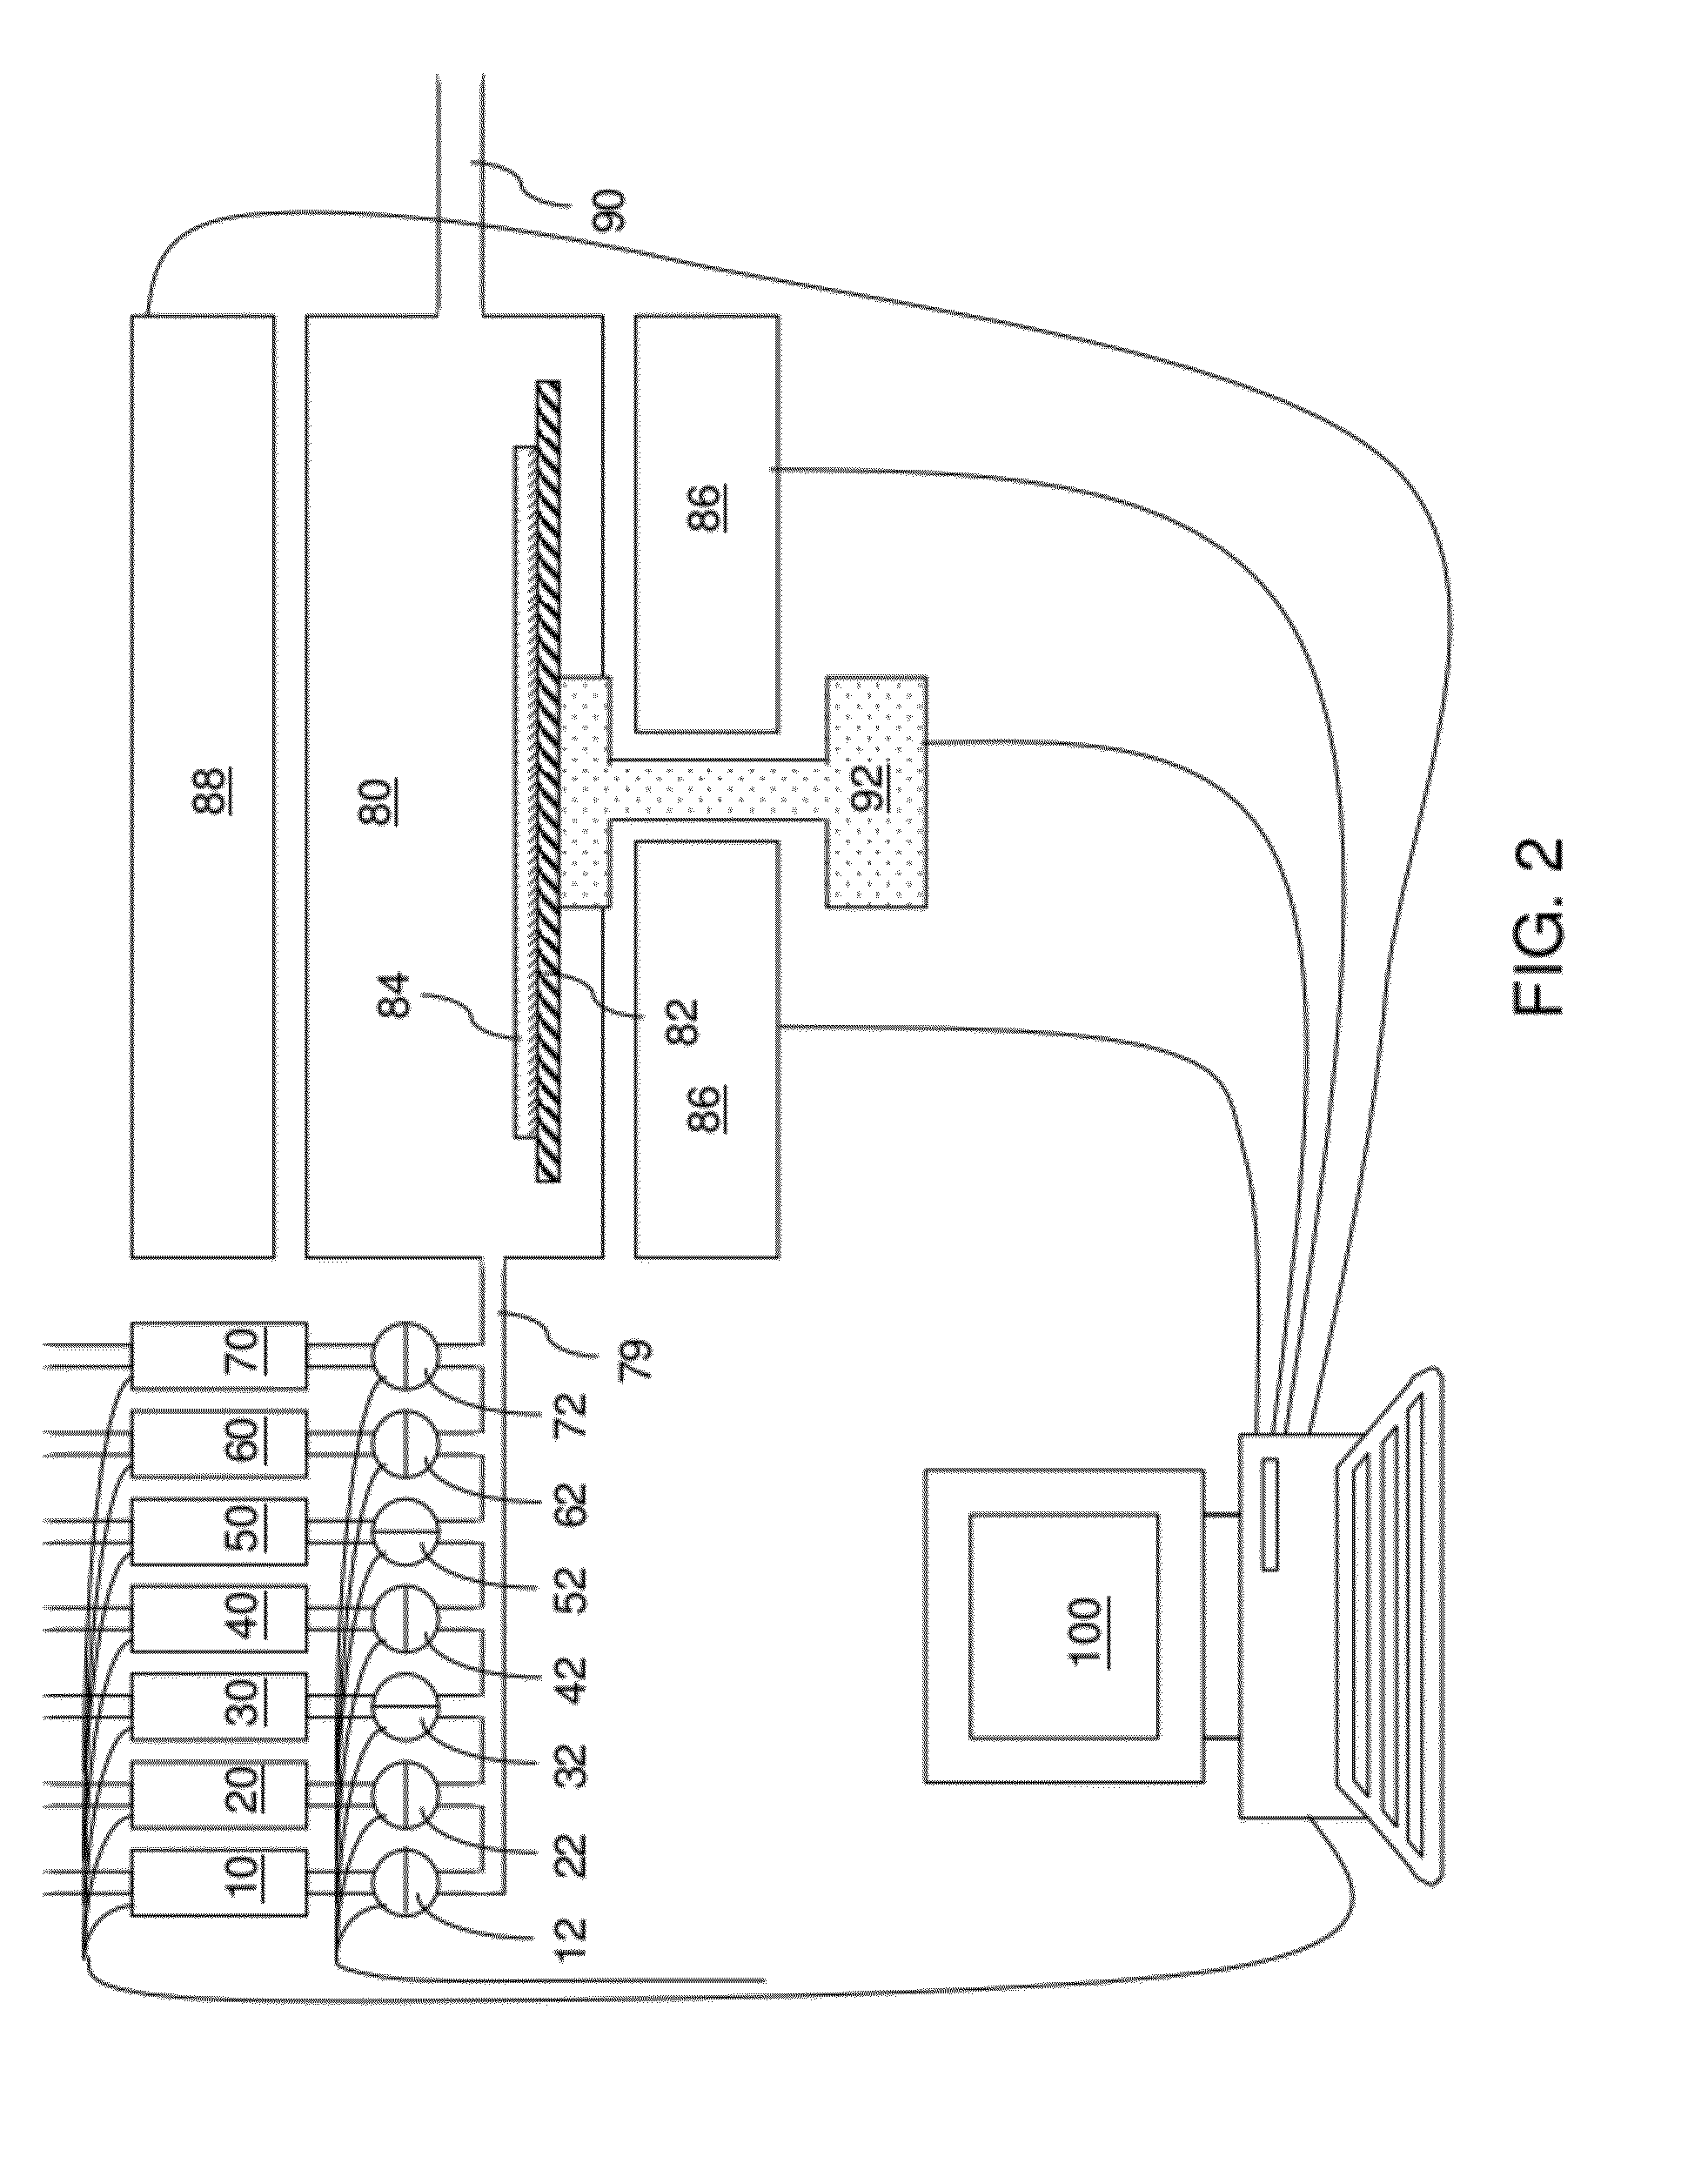 Low temperature selective epitaxy of silicon germanium alloys employing cyclic deposit and etch